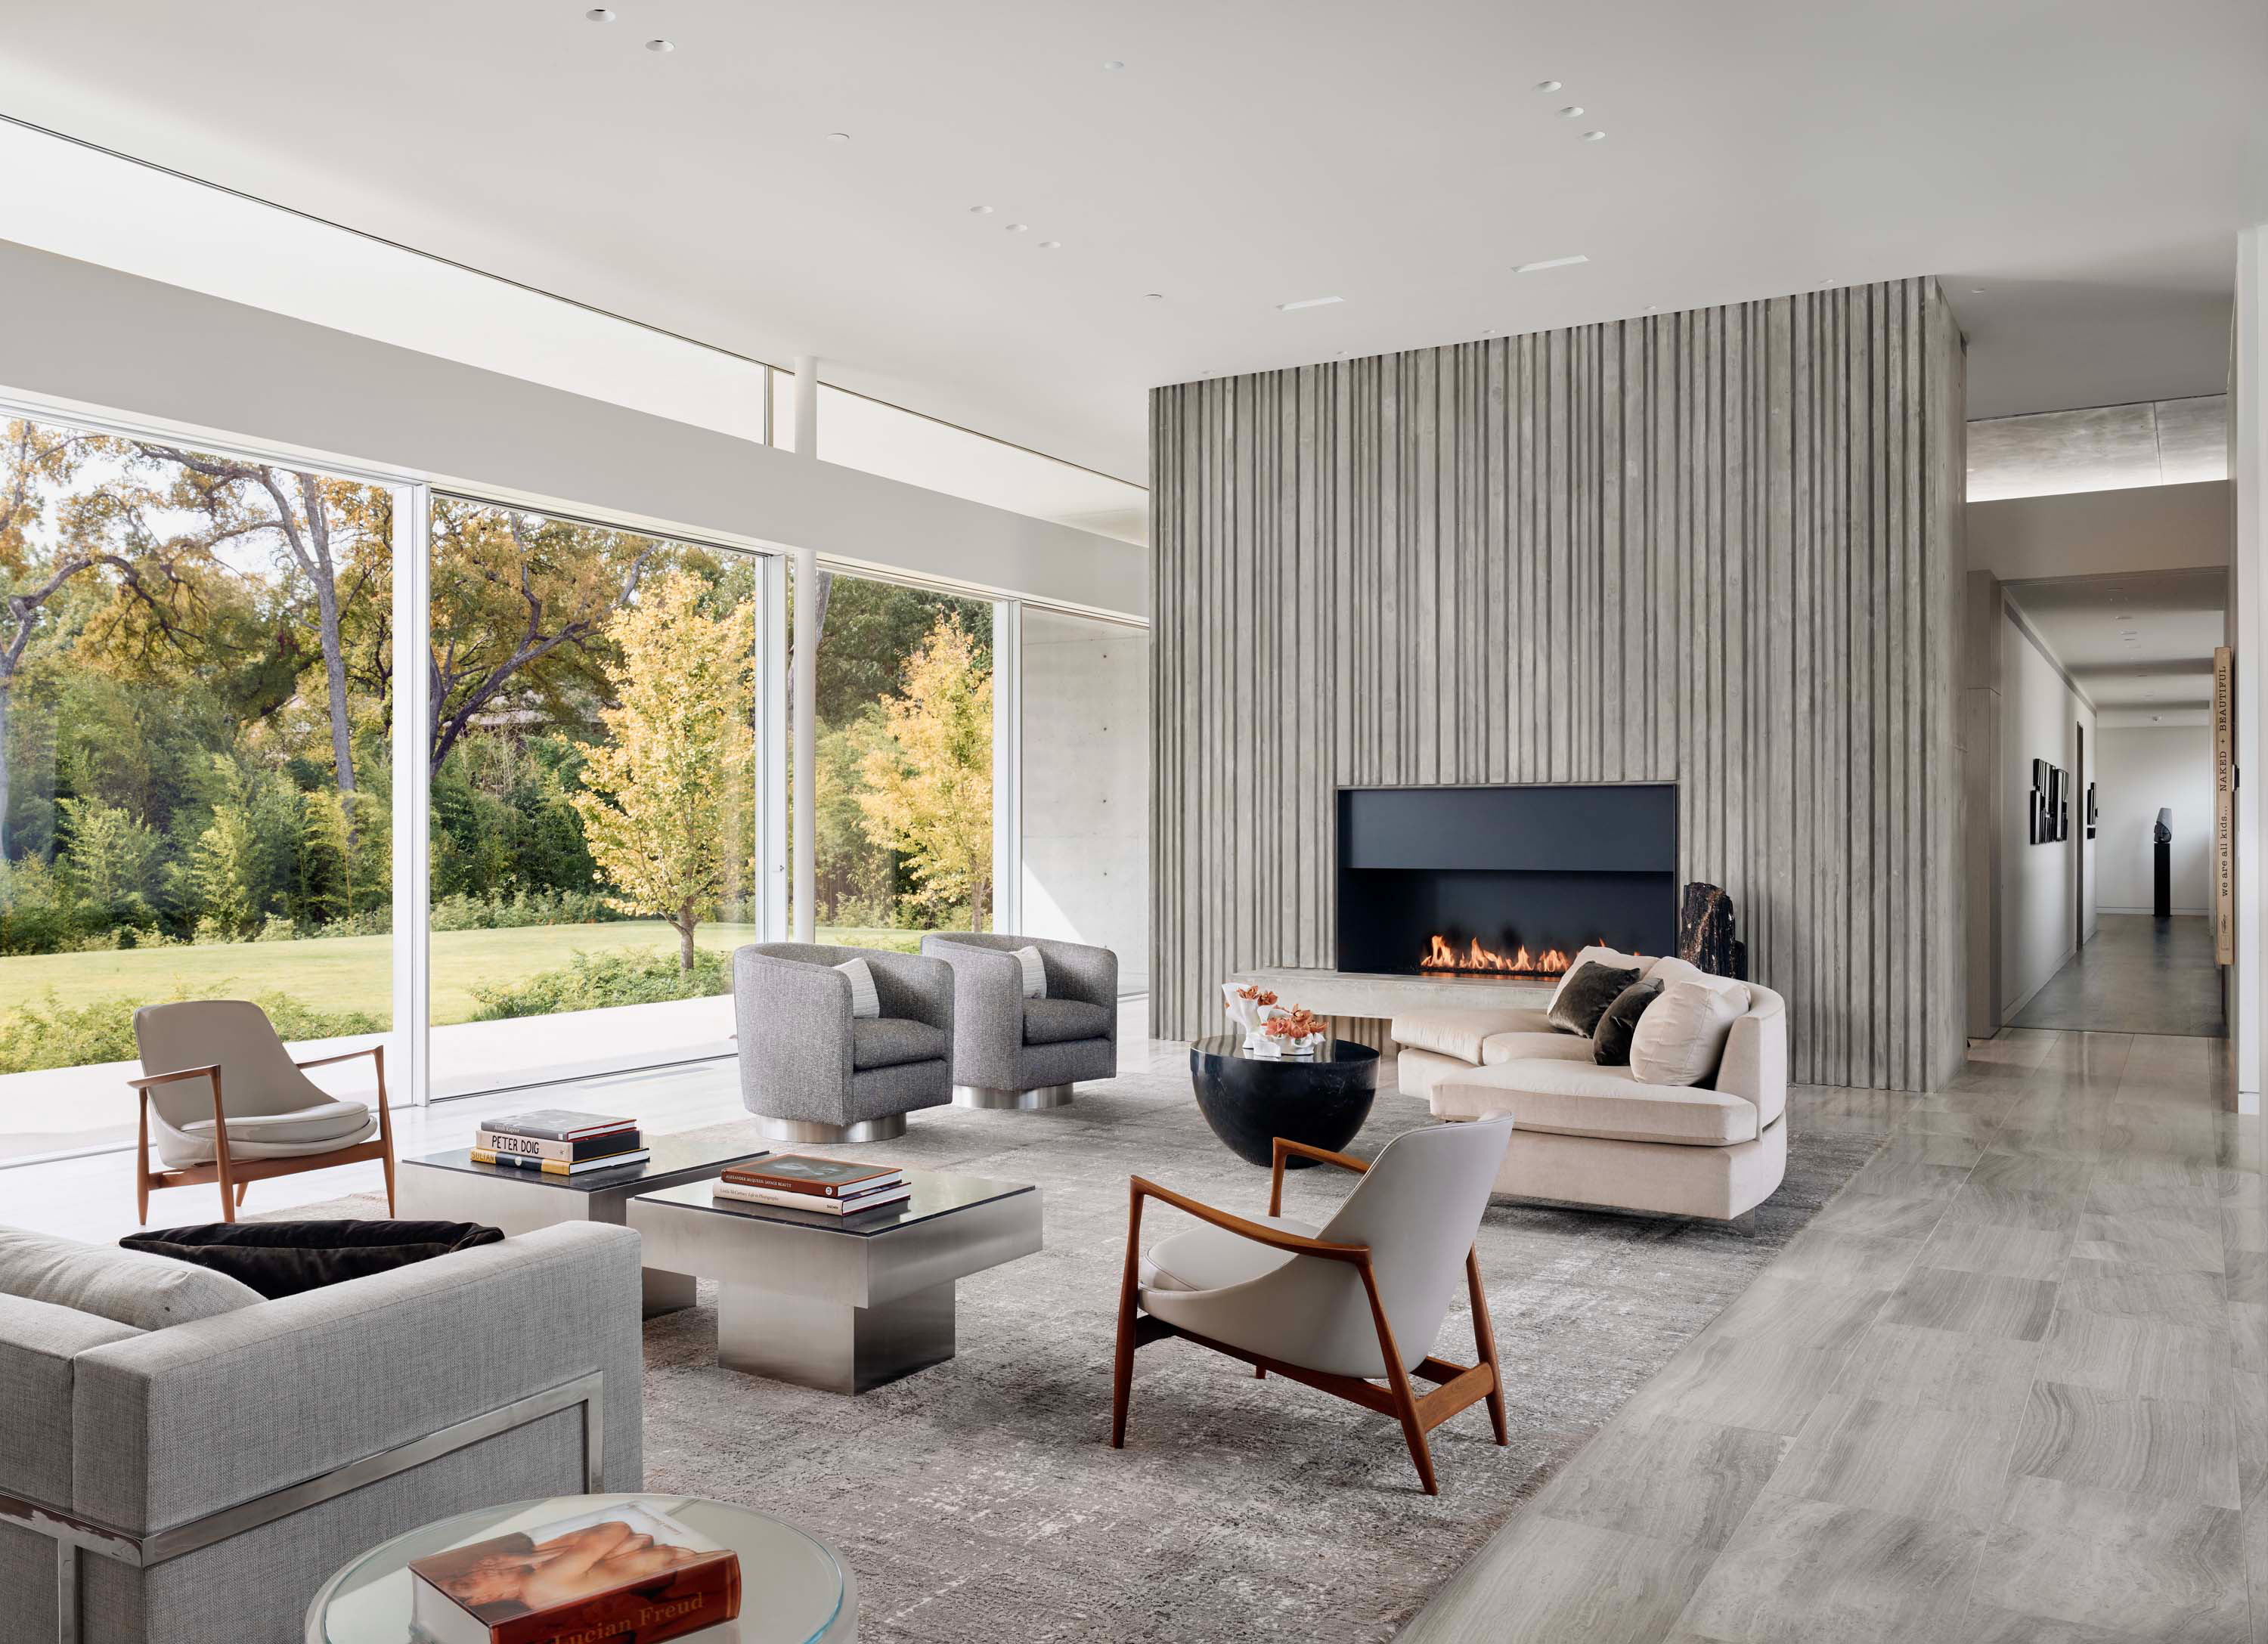 Interior photo of the Preston Hollow Residence by Specht Novak Architects. Shot by Manolo Langis, featuring an expansive living space with fireplace and open views of the yard.